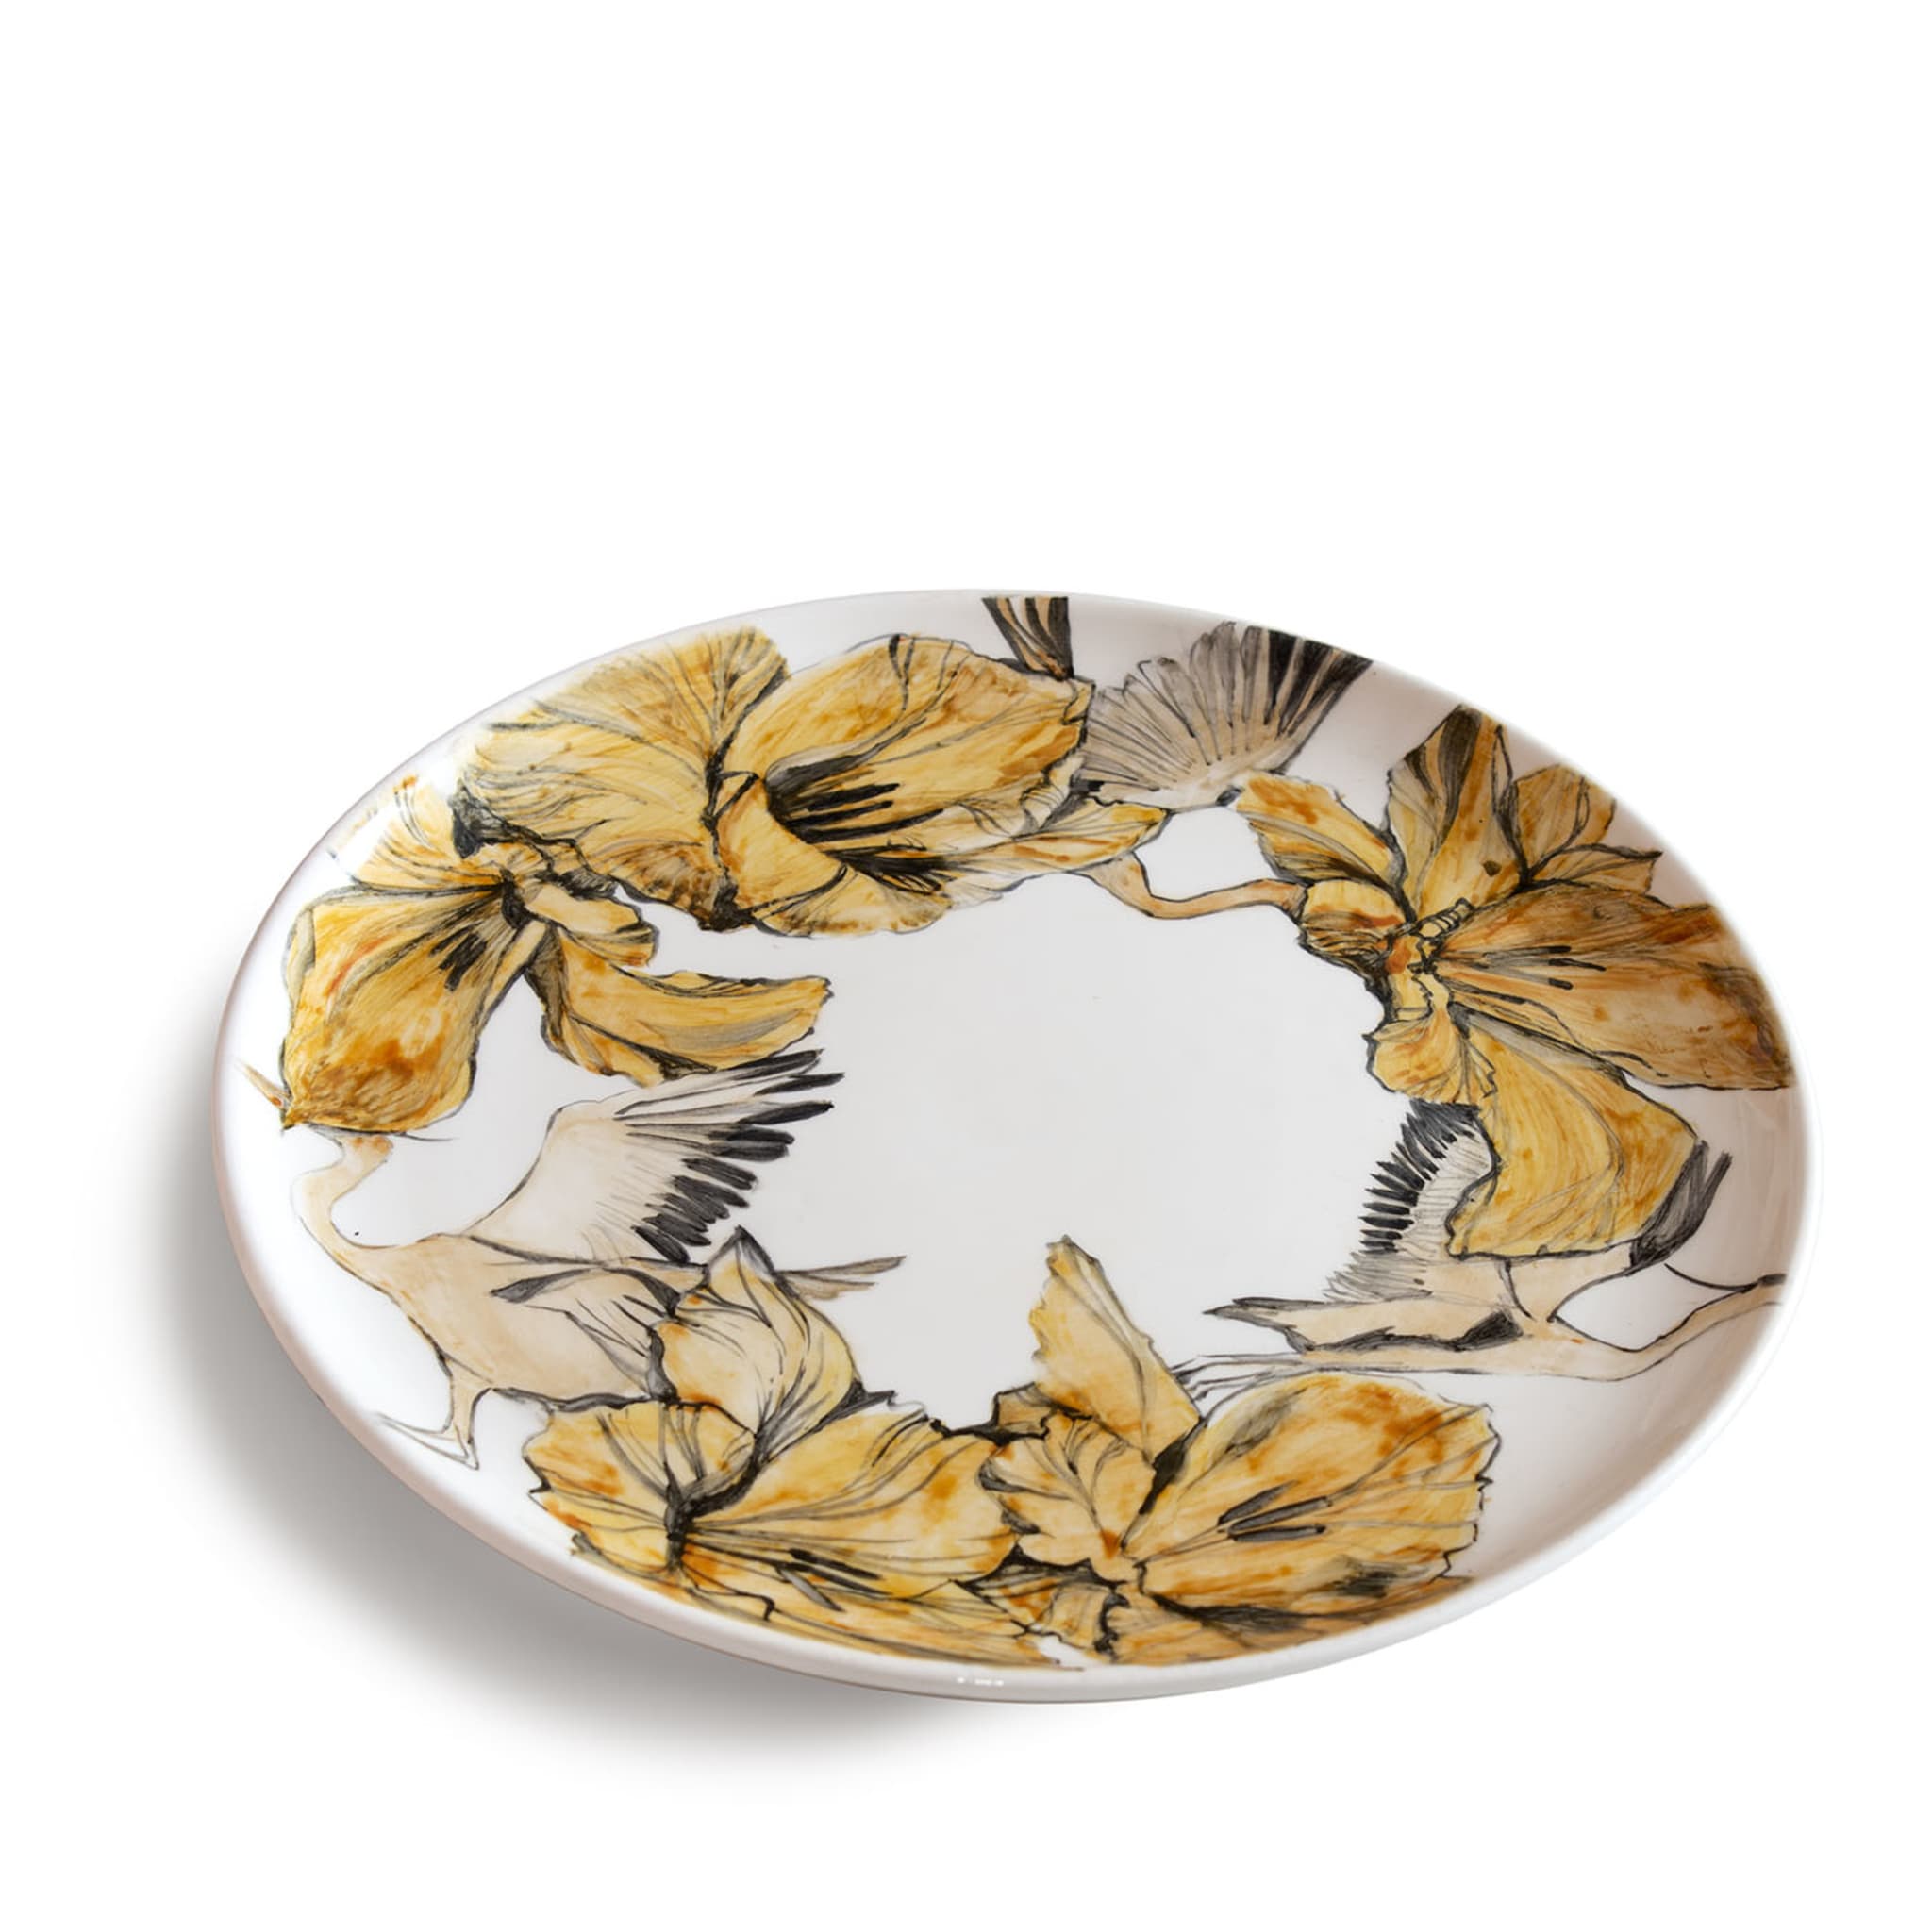 Ethereal Blossom Charger Plate - Alternative view 1